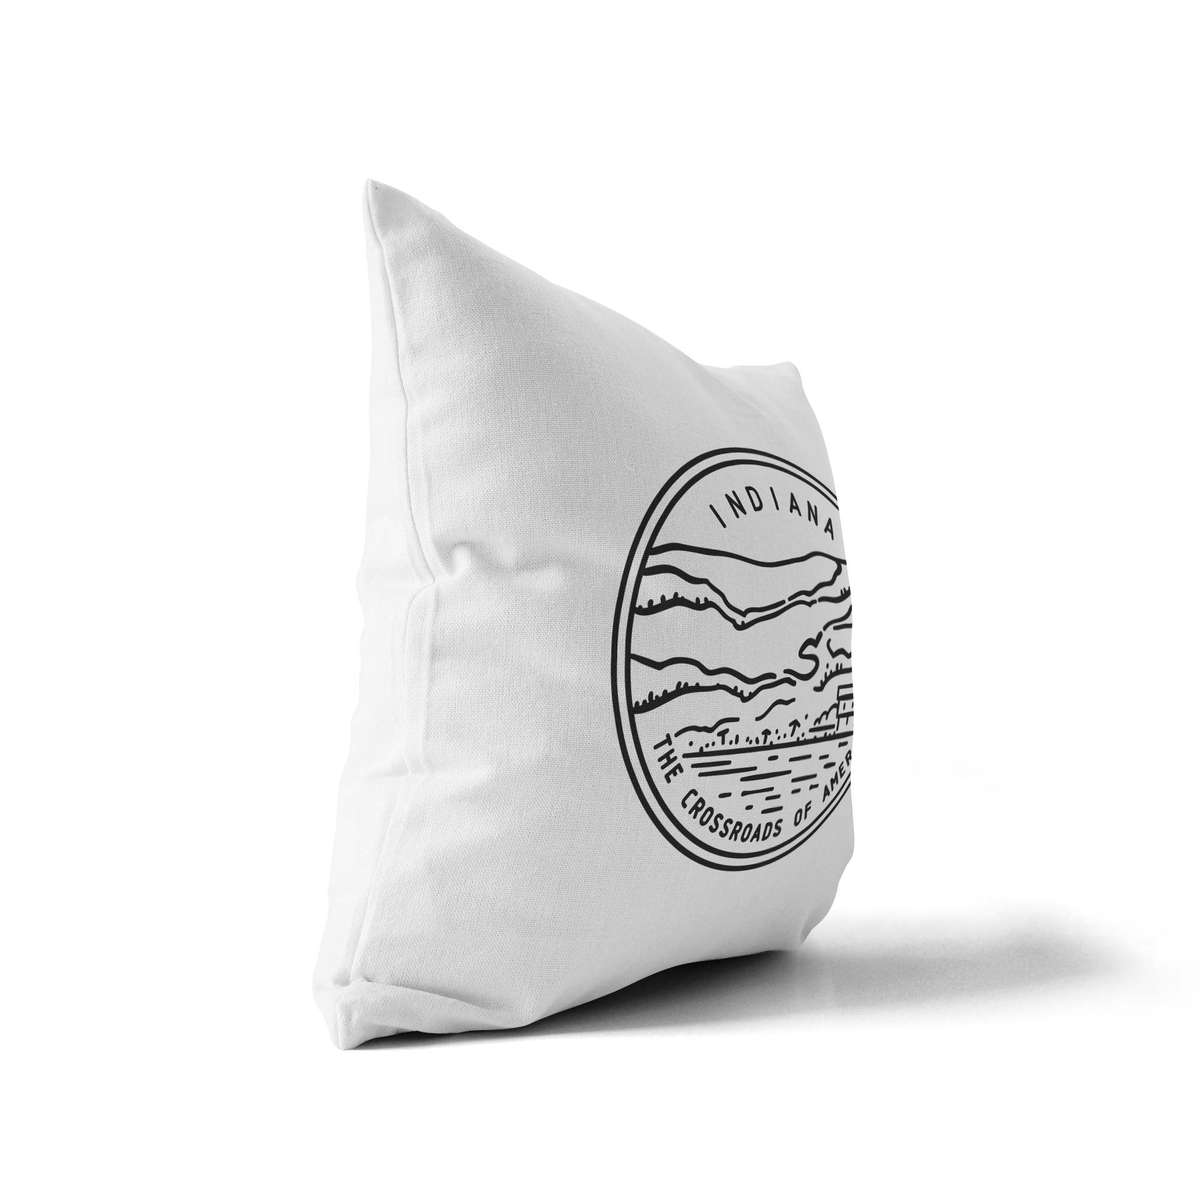 Indiana State Crest Throw Pillow